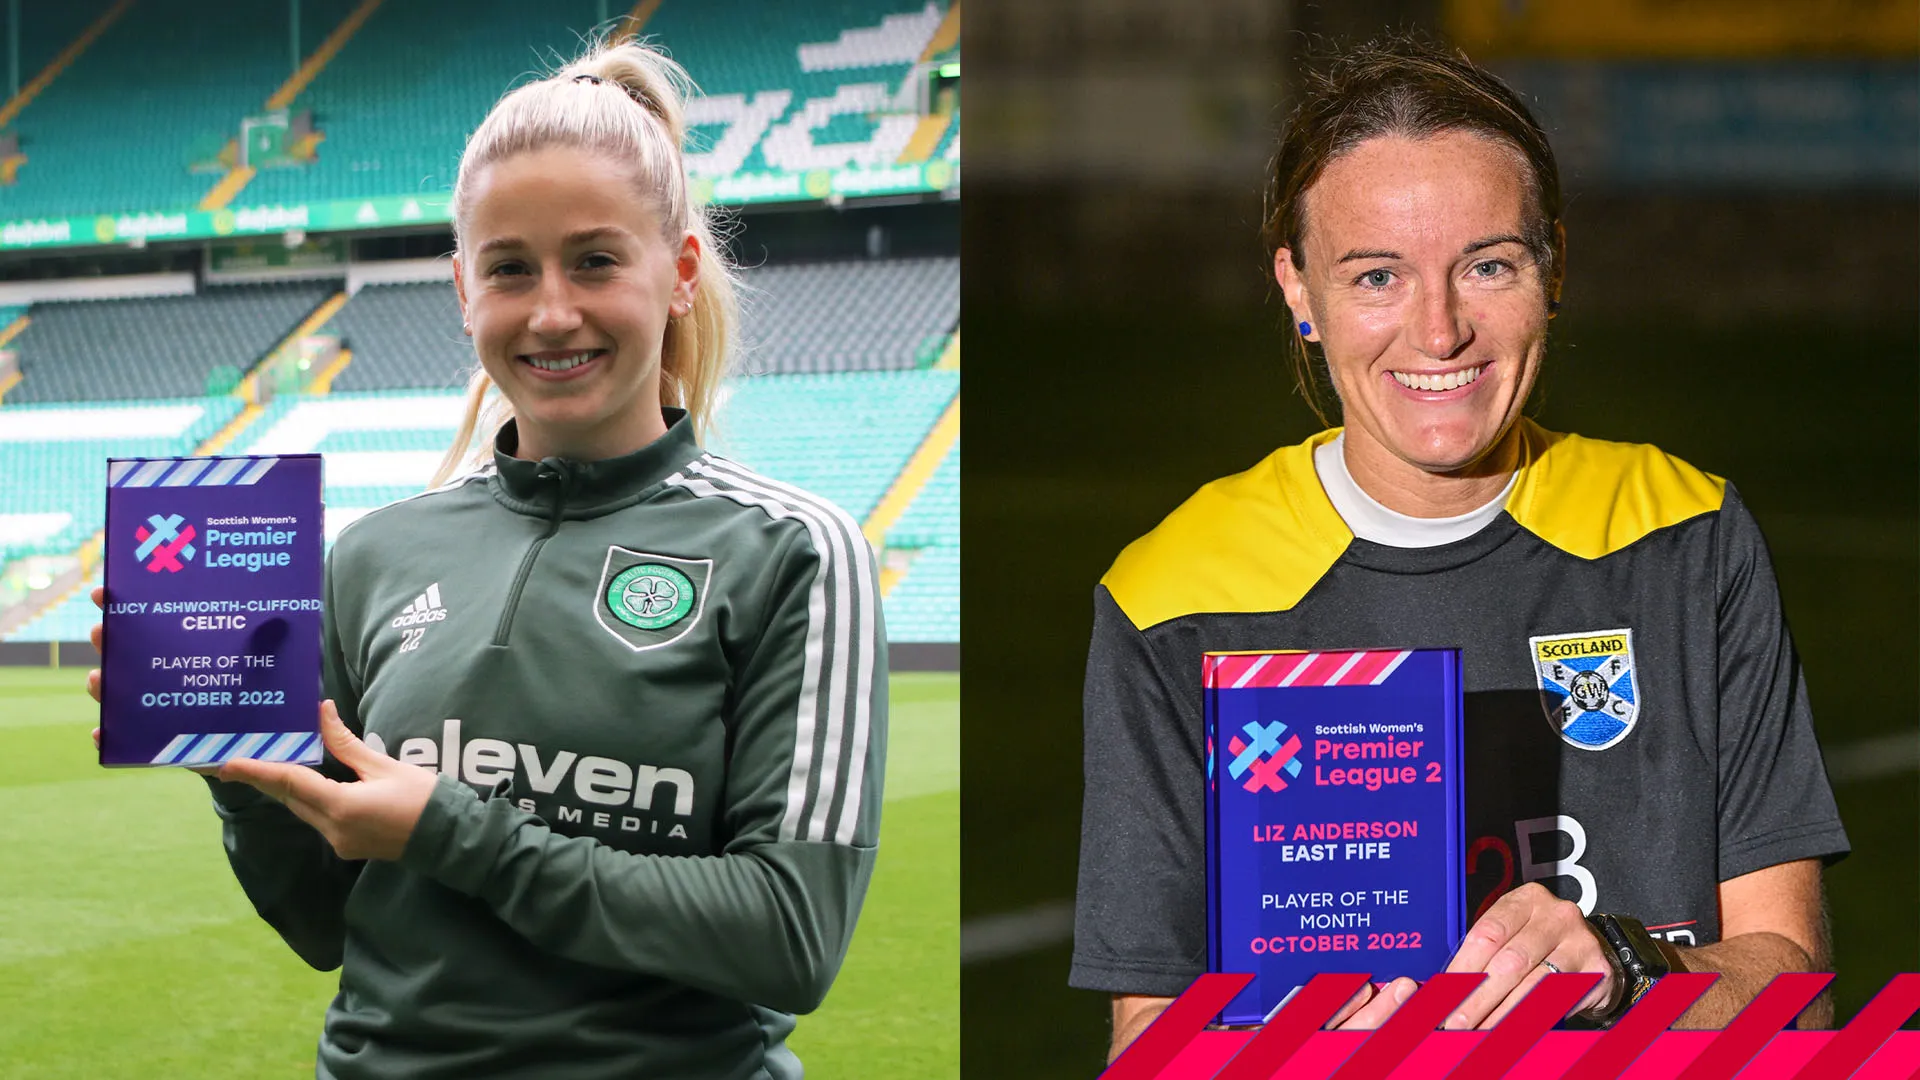 Image for Celtic’s Ashworth-Clifford and East Fife’s Anderson win Player of the Month awards